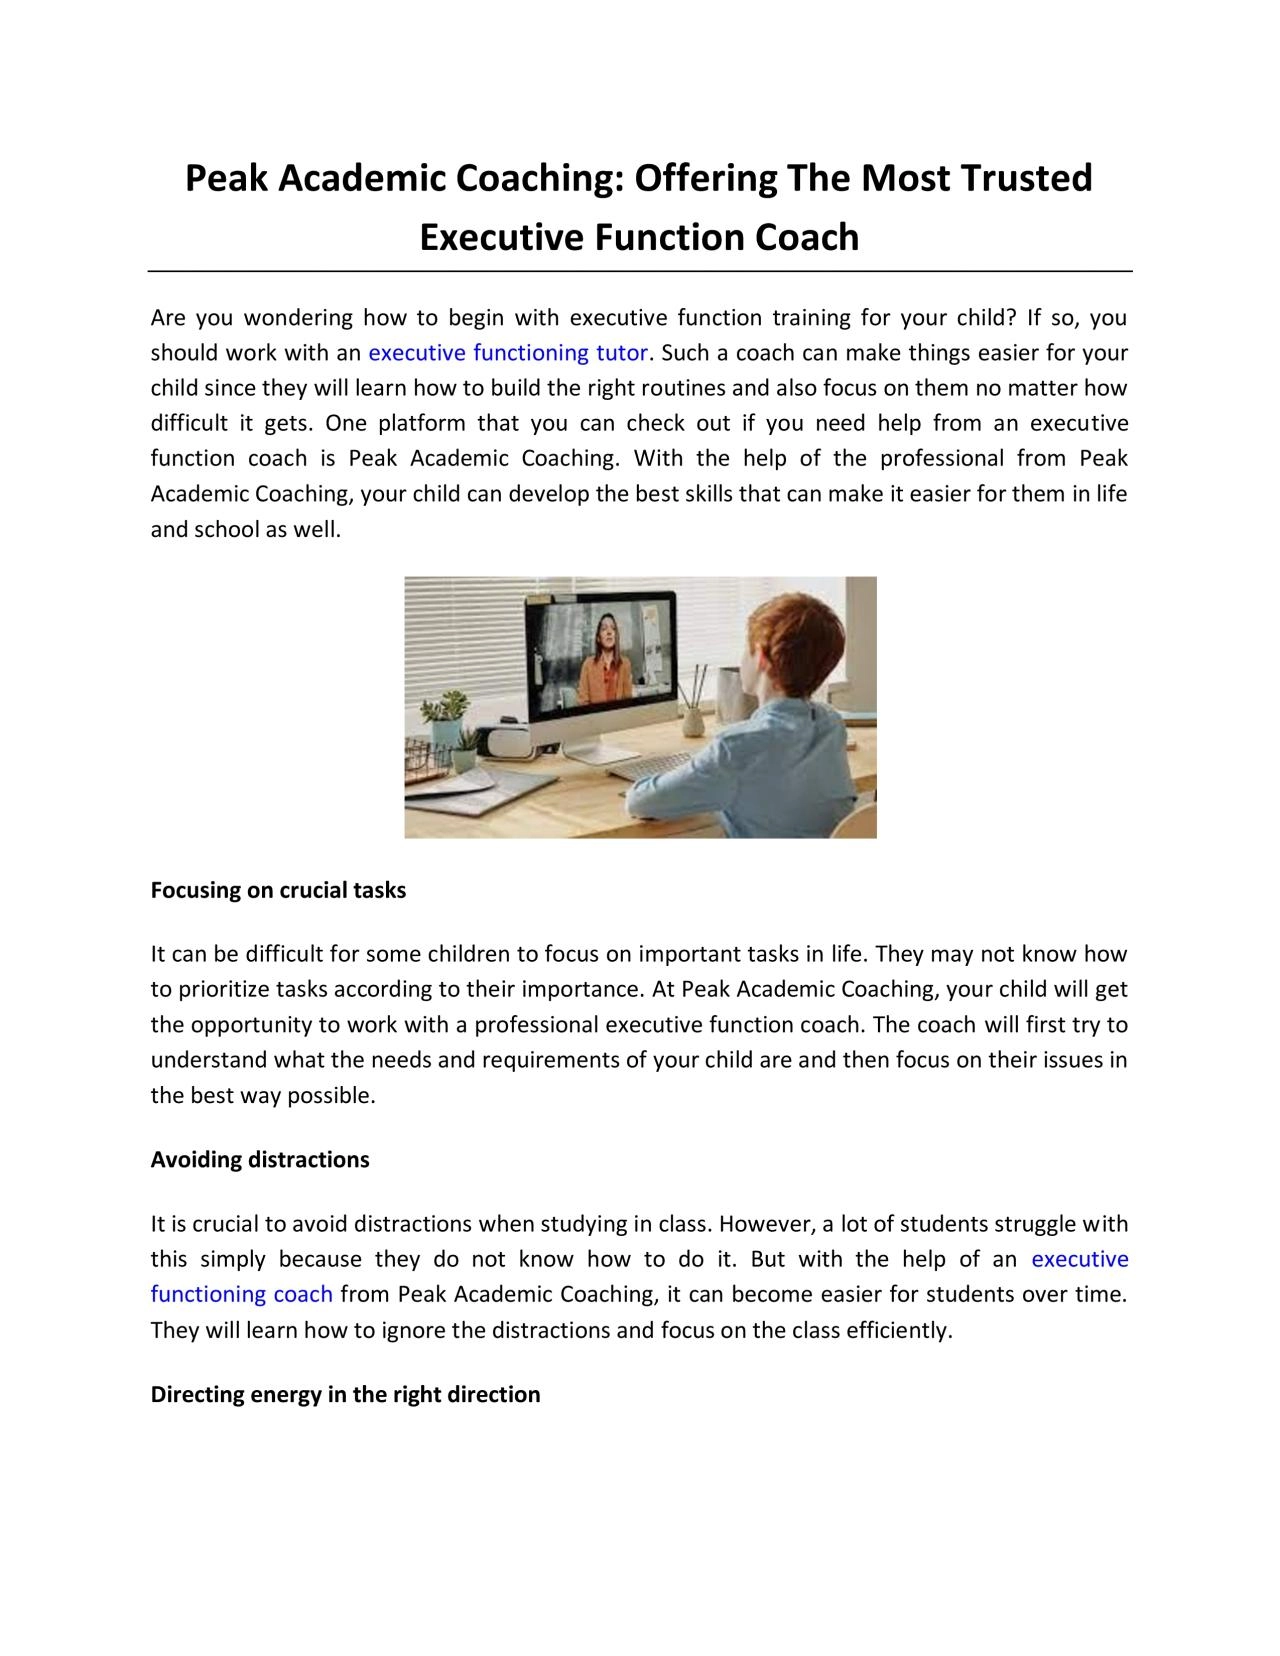 Peak Academic Coaching: Offering The Most Trusted Executive Function Coach